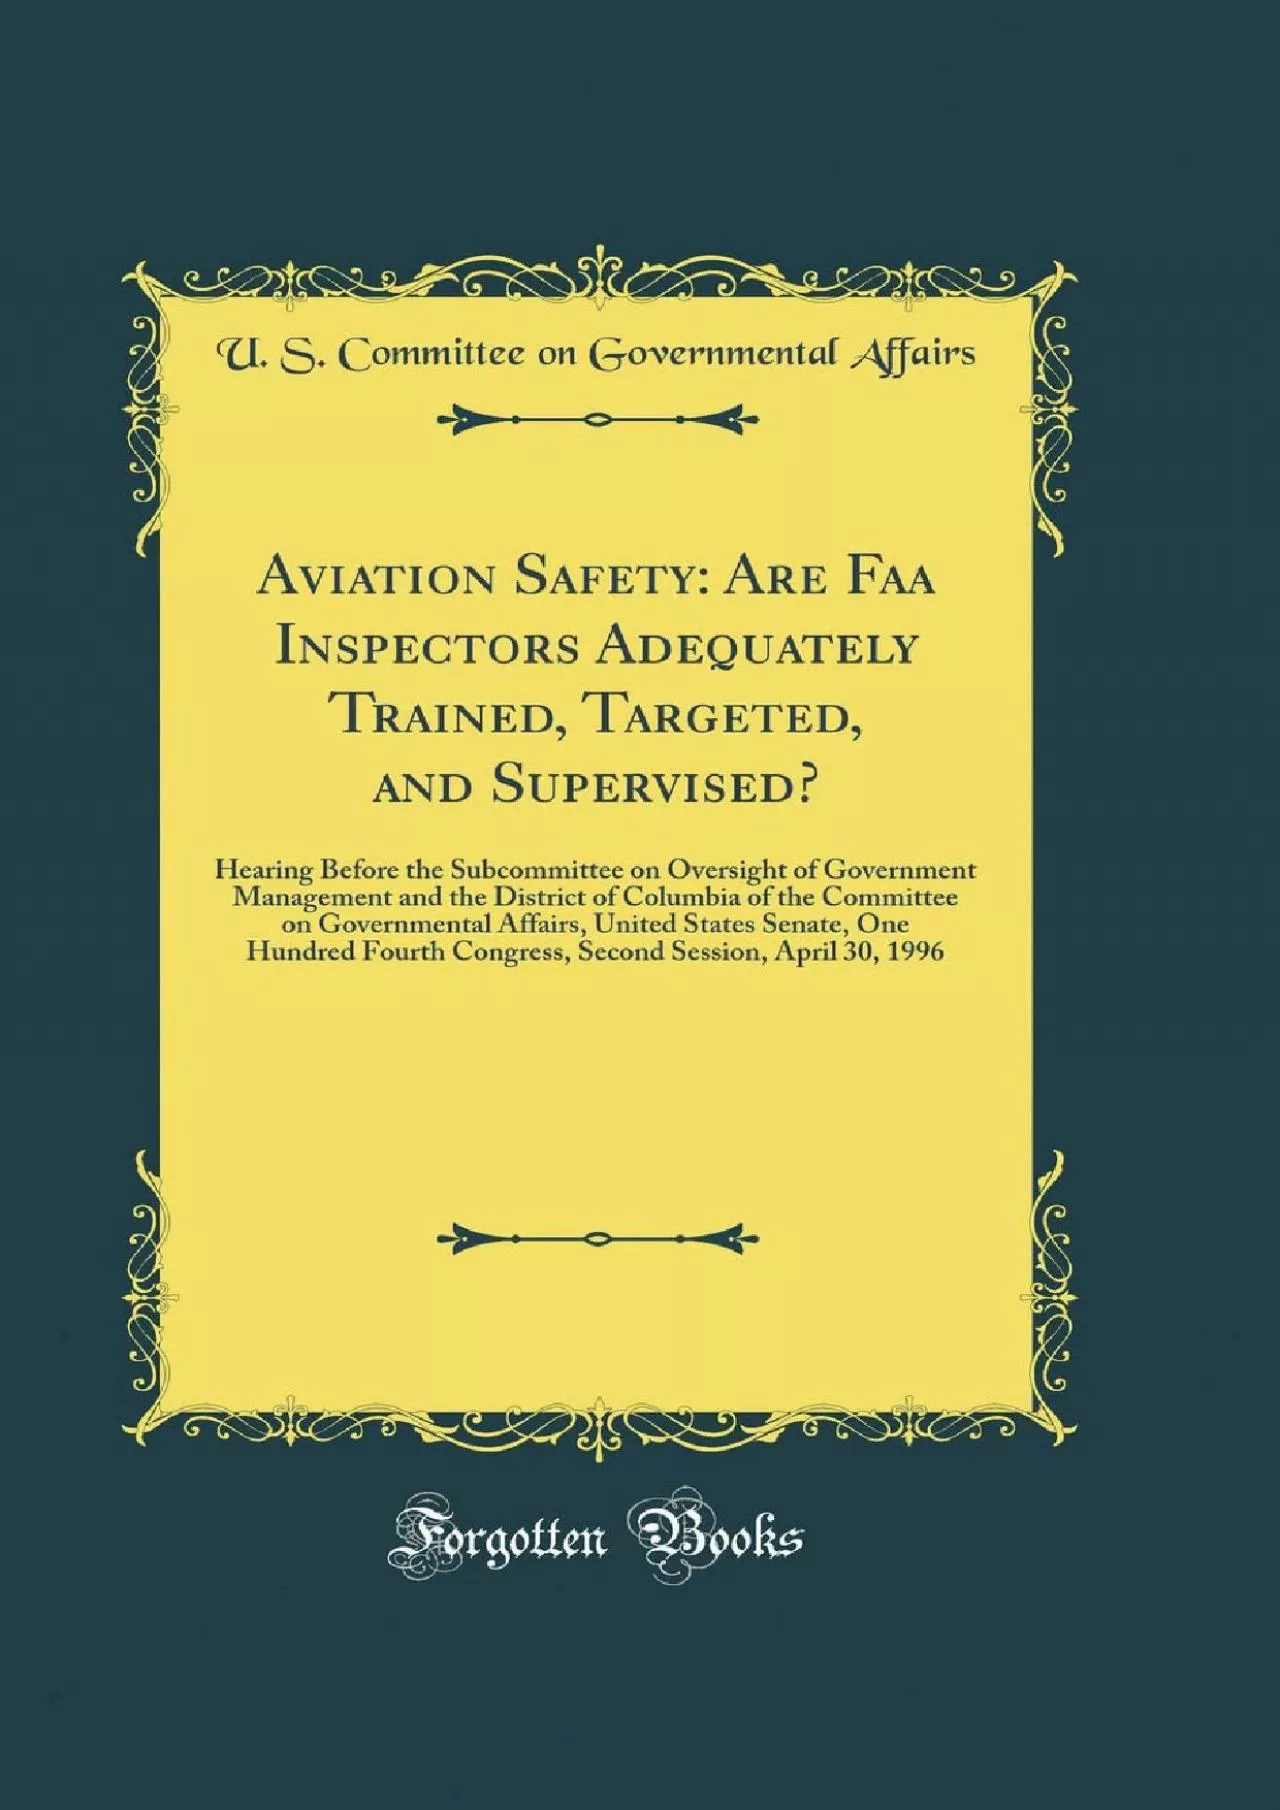 (DOWNLOAD)-Aviation Safety: Are Faa Inspectors Adequately Trained, Targeted, and Supervised?: